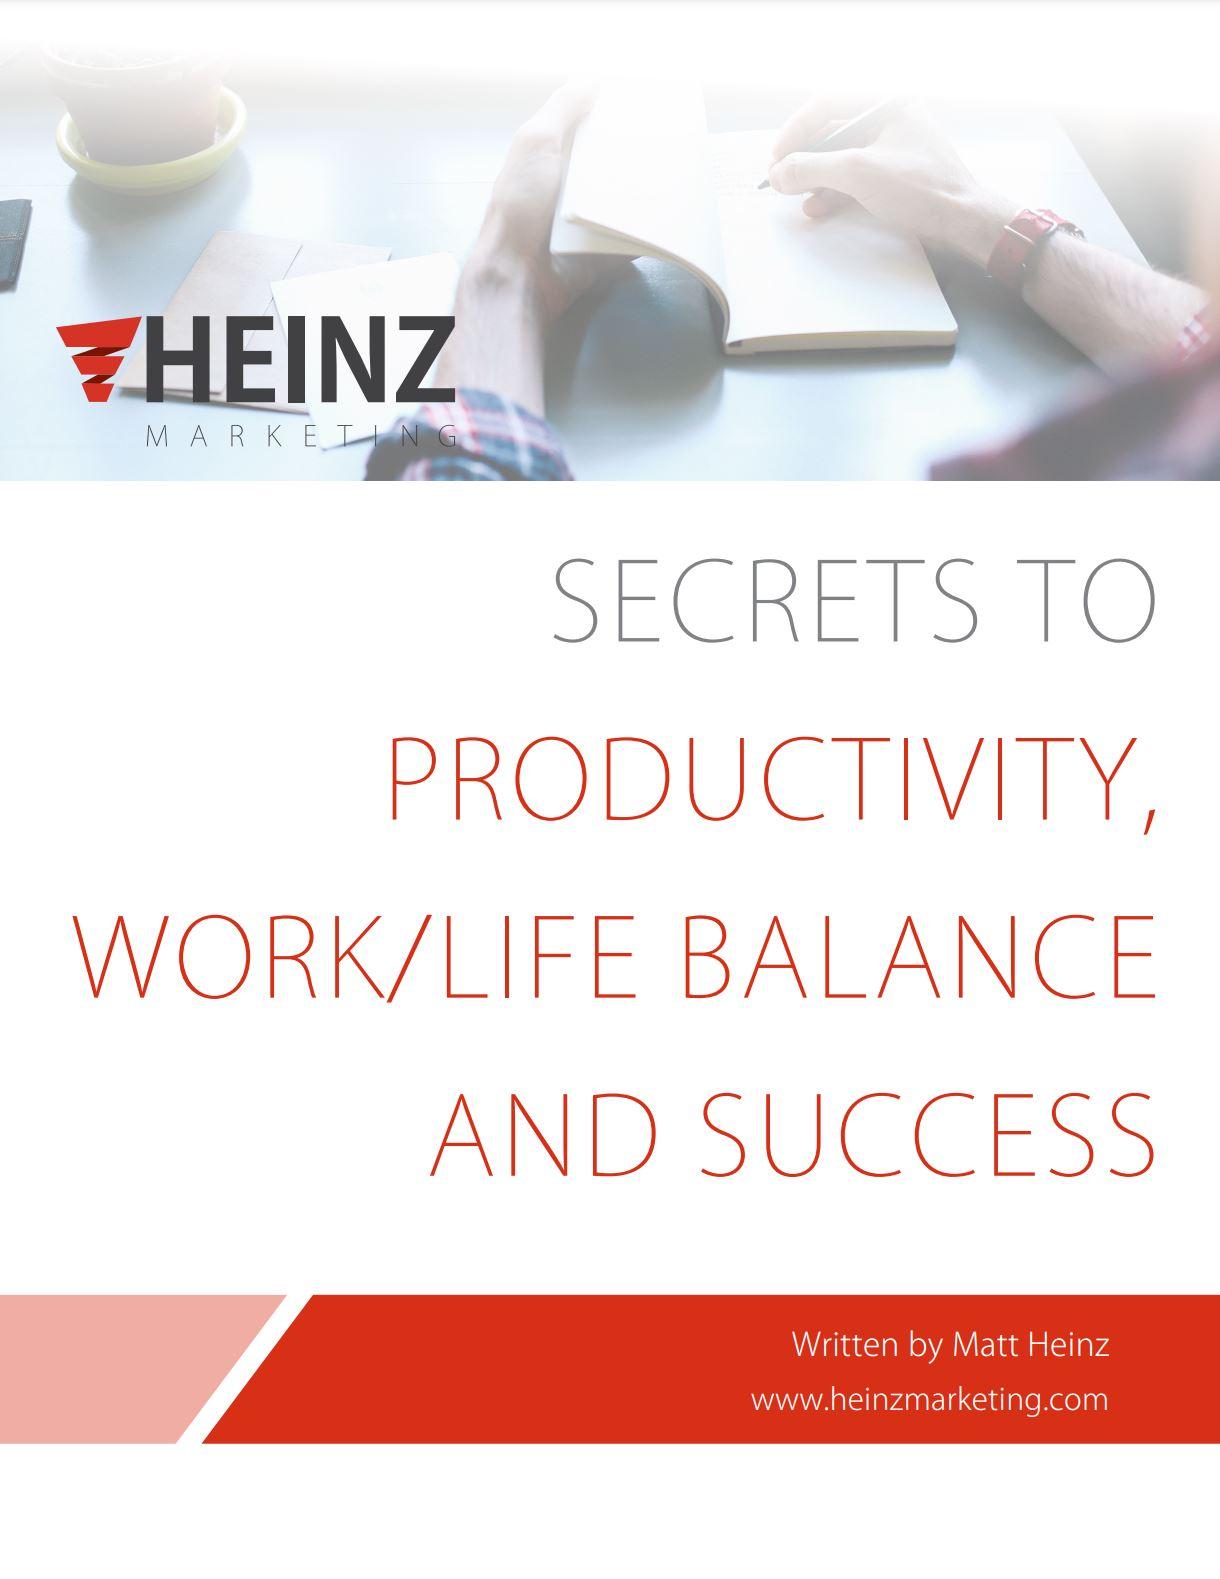 Product: Secrets to Productivity, Work/Life Balance and Success | Heinz Marketing